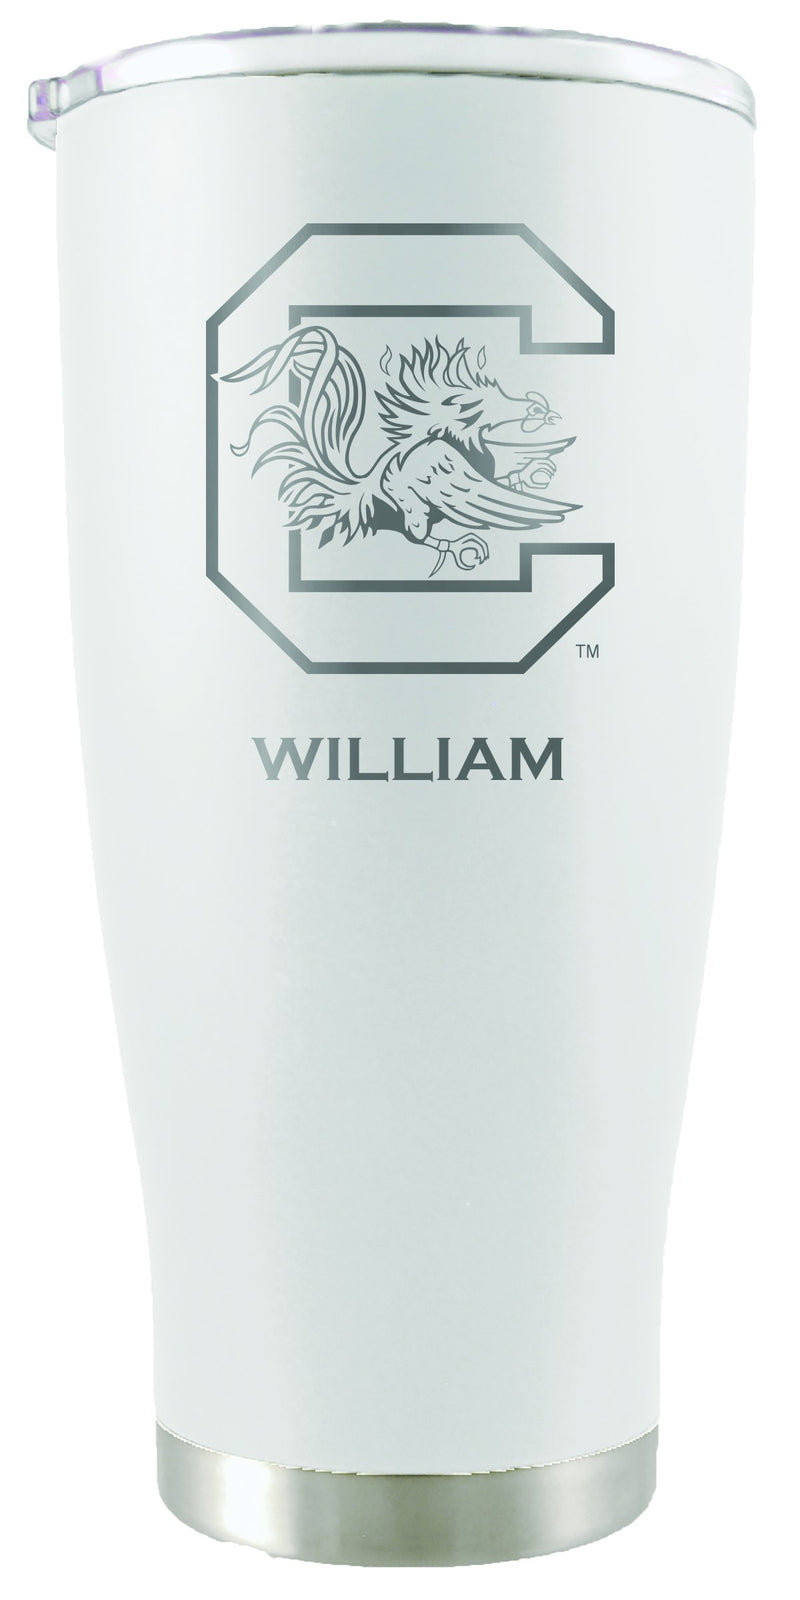 20oz White Personalized Stainless Steel Tumbler | South Carolina
COL, CurrentProduct, Drinkware_category_All, Personalized_Personalized, South Carolina Gamecocks, USC
The Memory Company